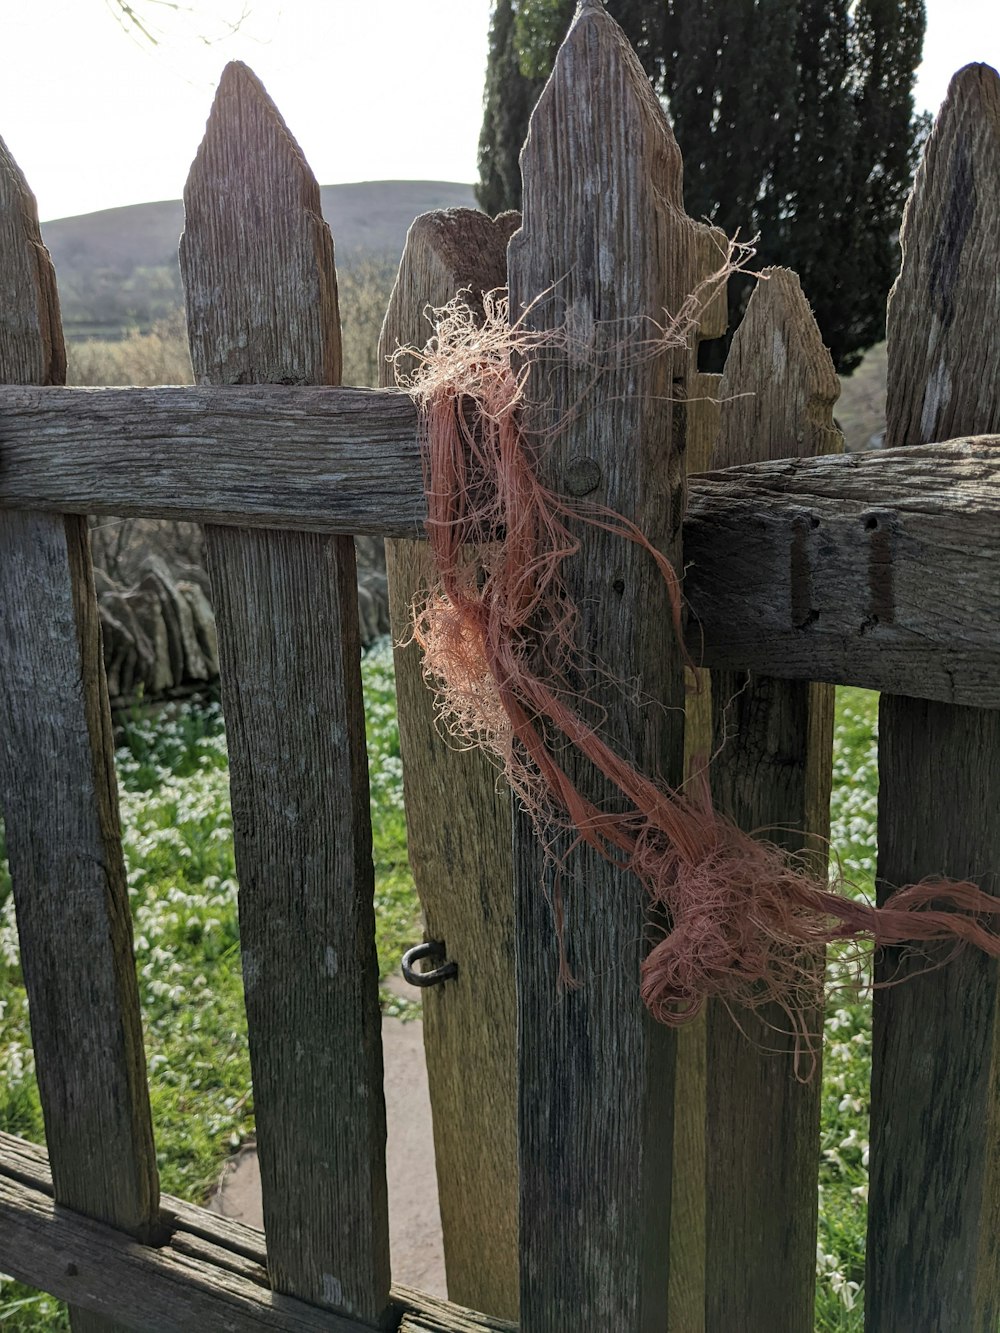 a wooden fence with a knot tied to it